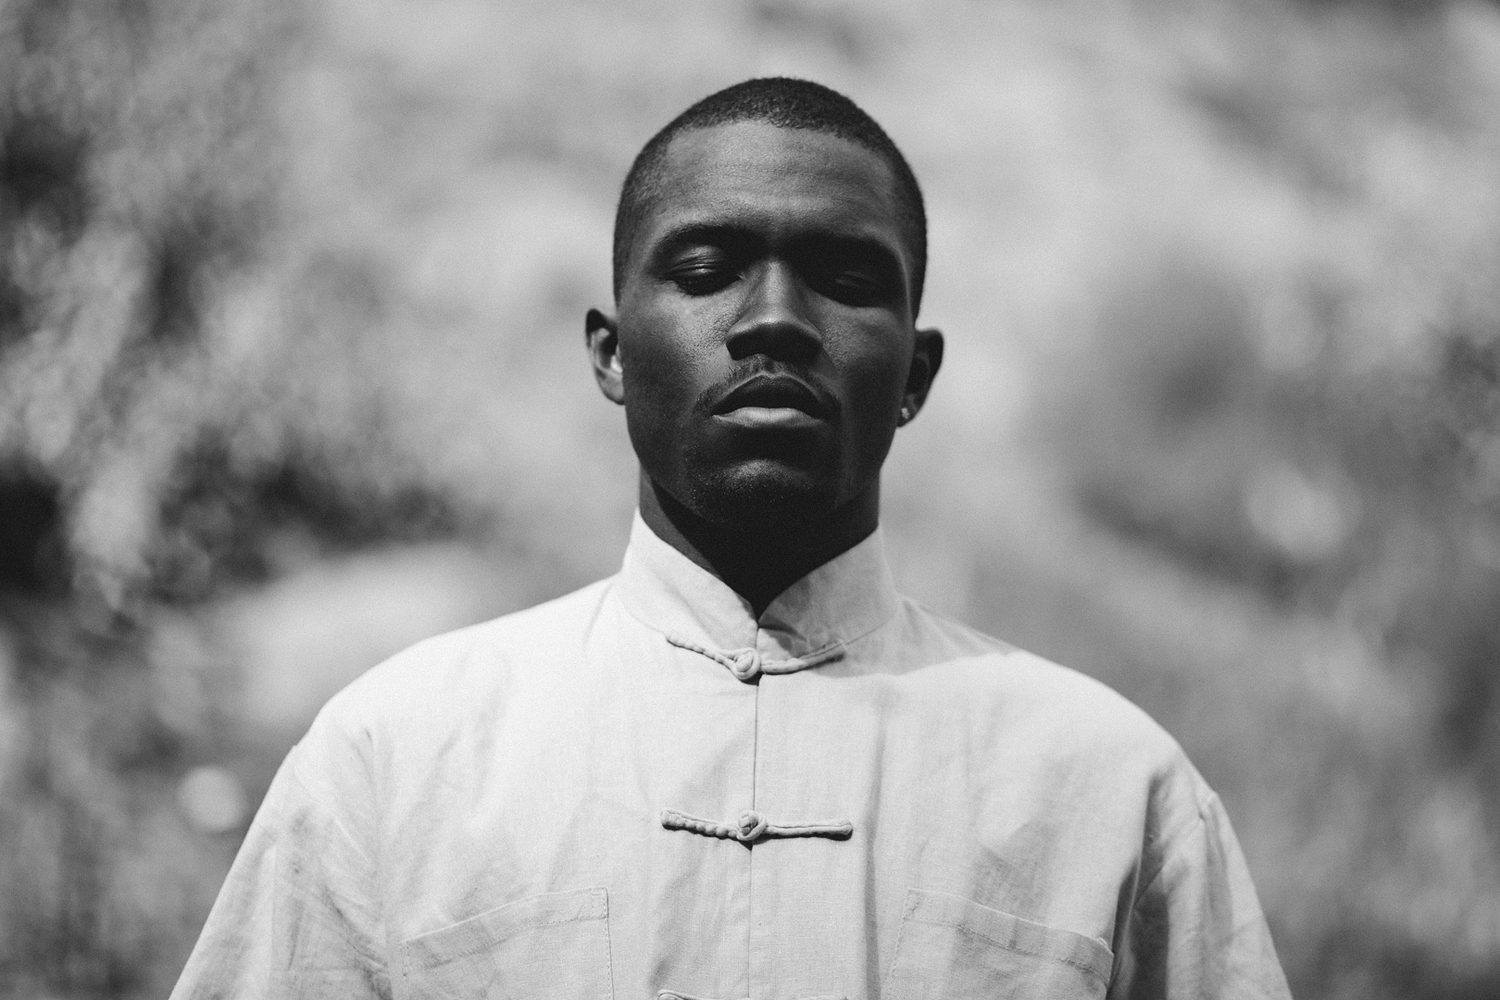 Frank Ocean shares new cover of The Isley Brothers